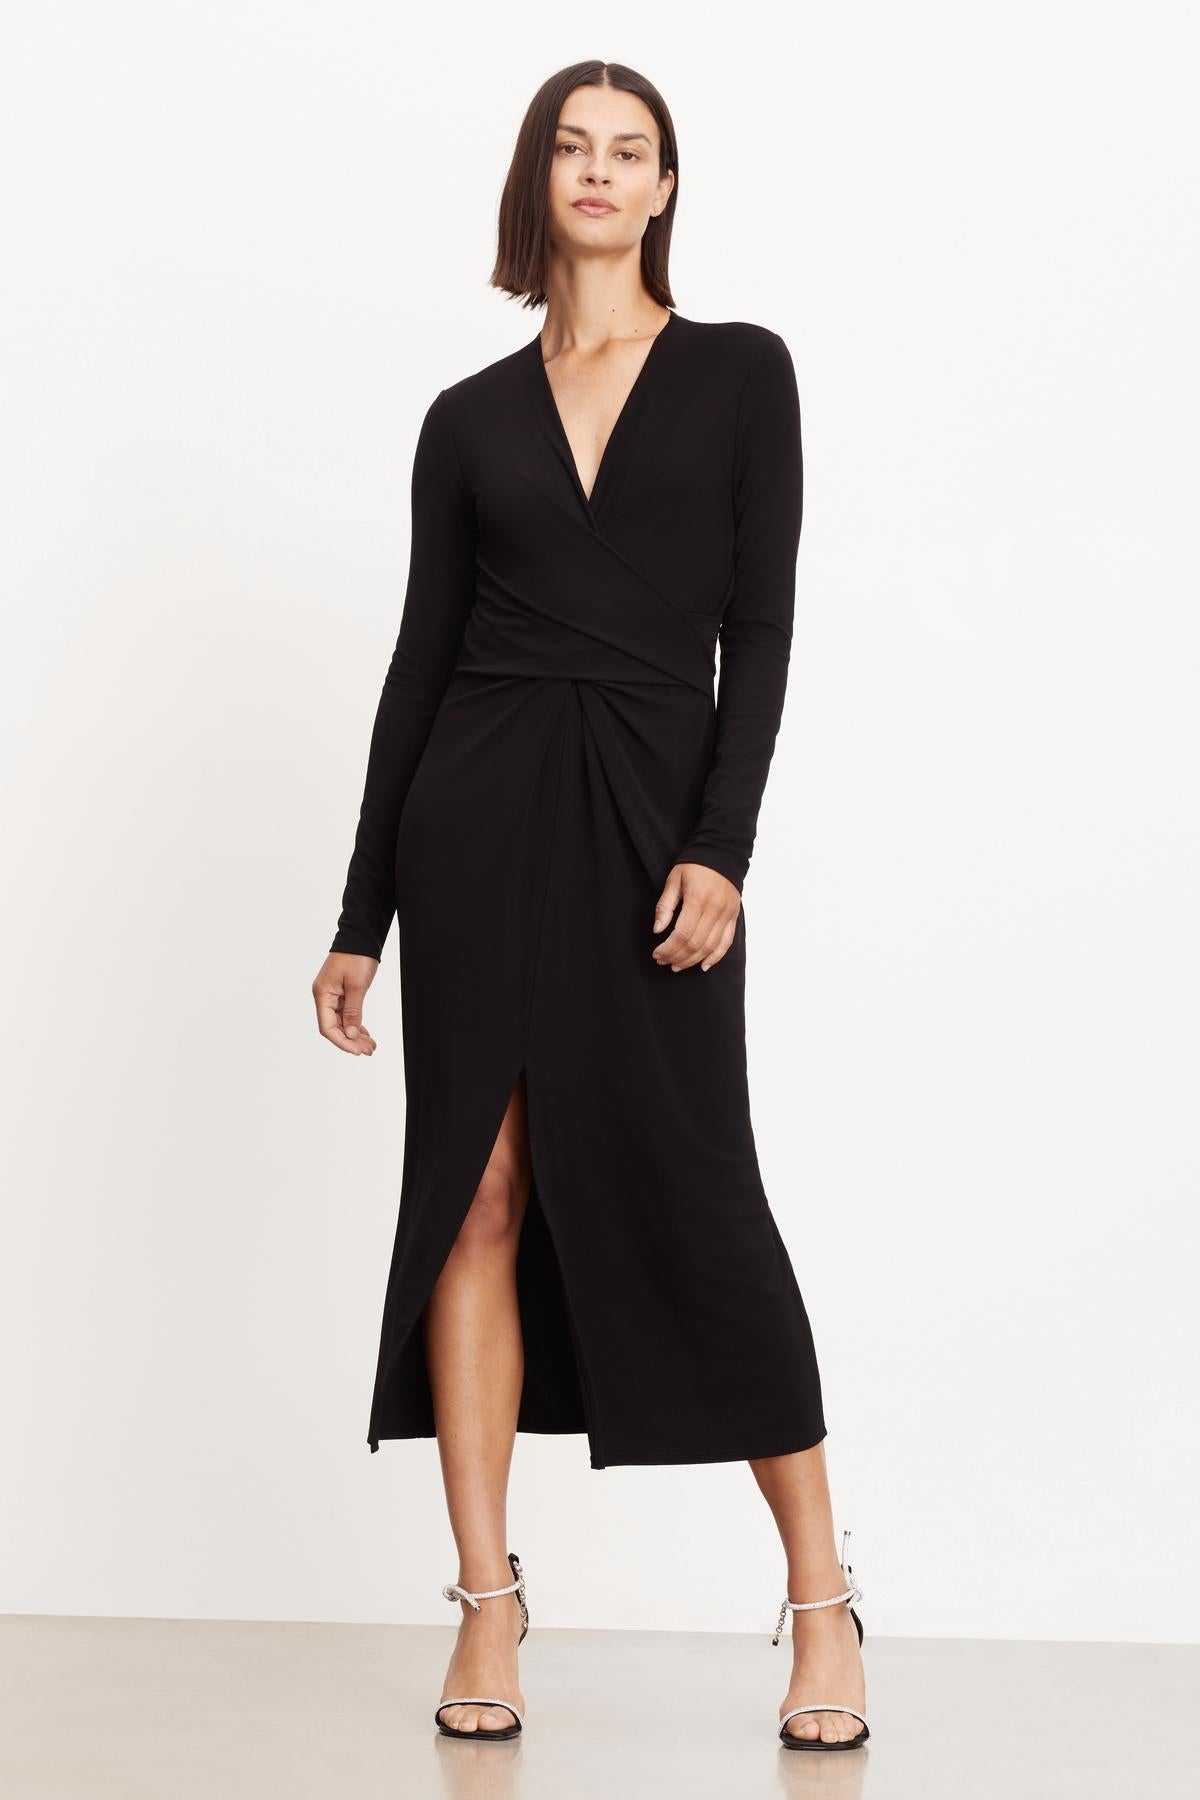 A model wearing an ELIANA WRAP MIDI DRESS by Velvet by Graham & Spencer, featuring a black matte jersey fabric, a thigh-high slit, and a v-neckline.-35654460571841